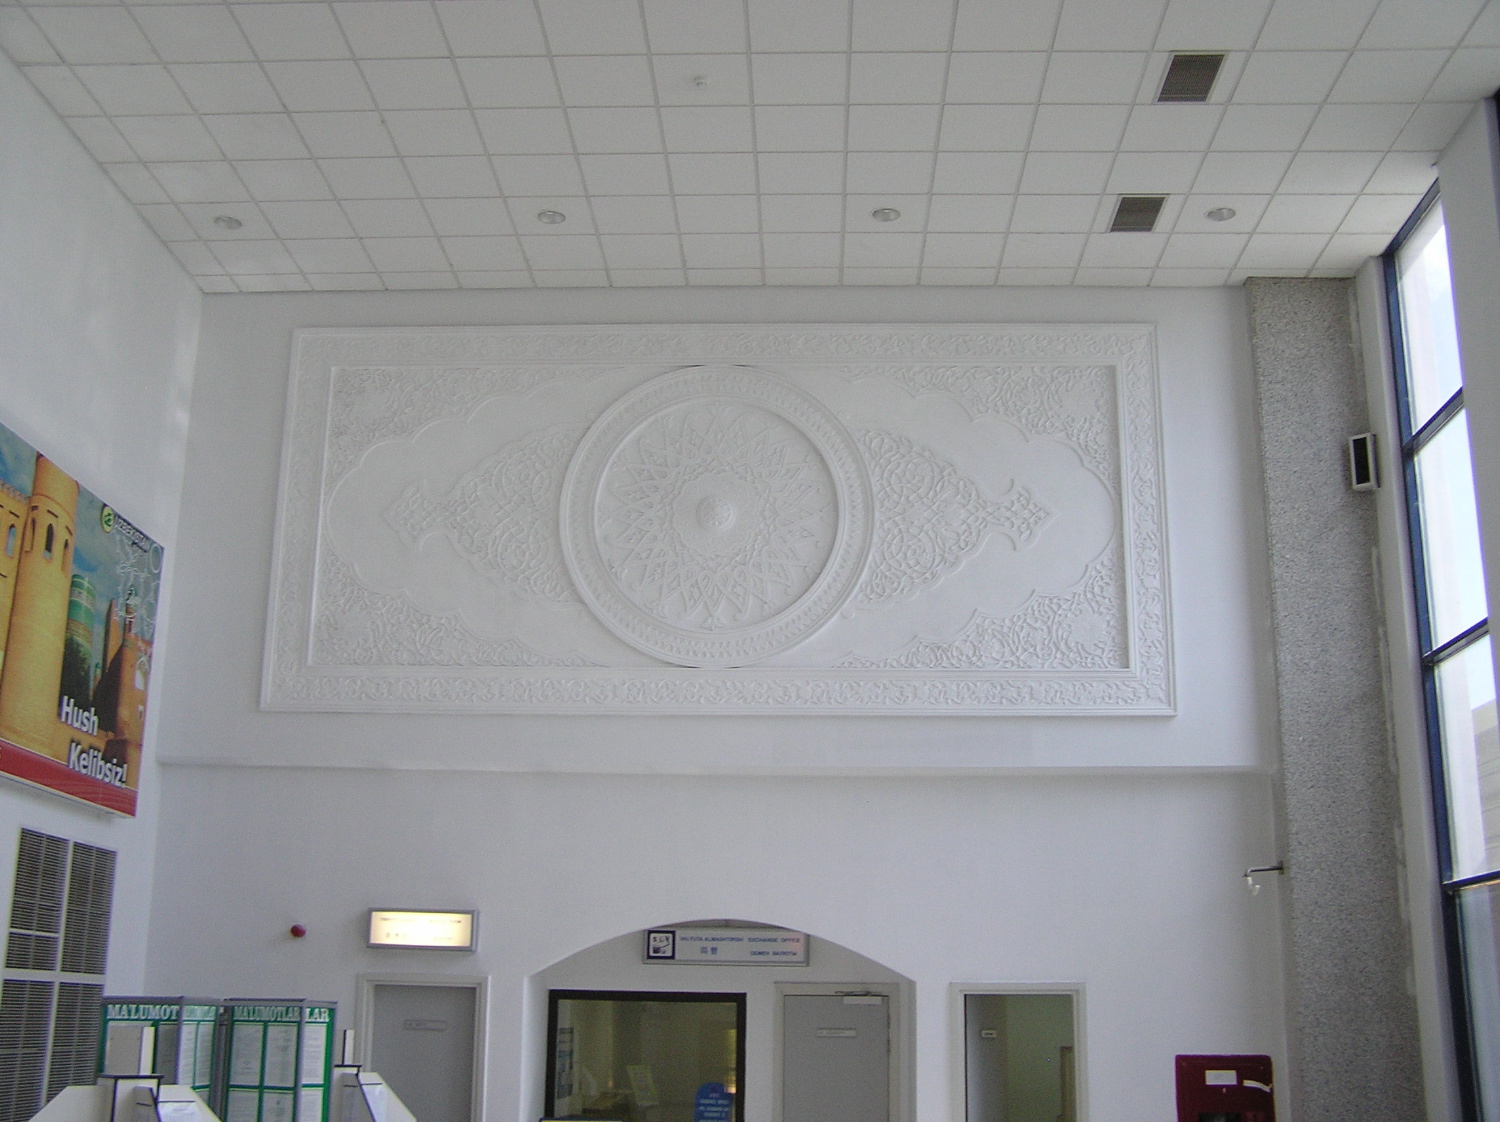 Wall ornament in the 1997 terminal